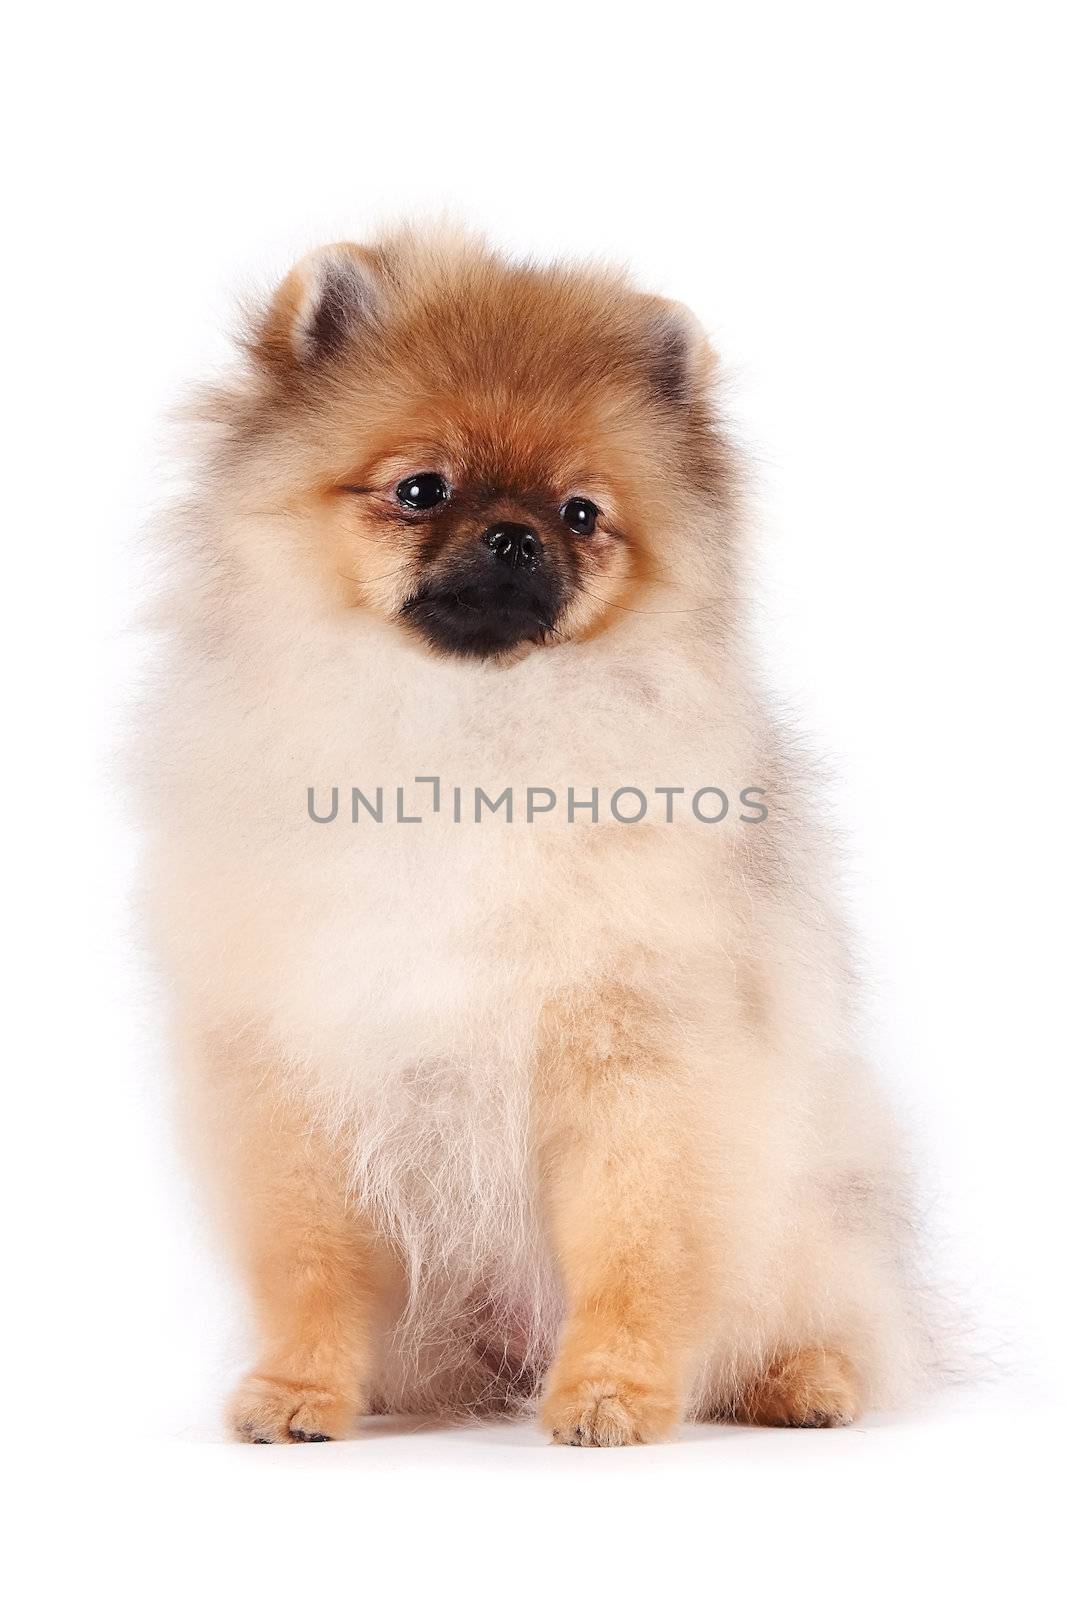 Puppy of a spitz-dog on a white background